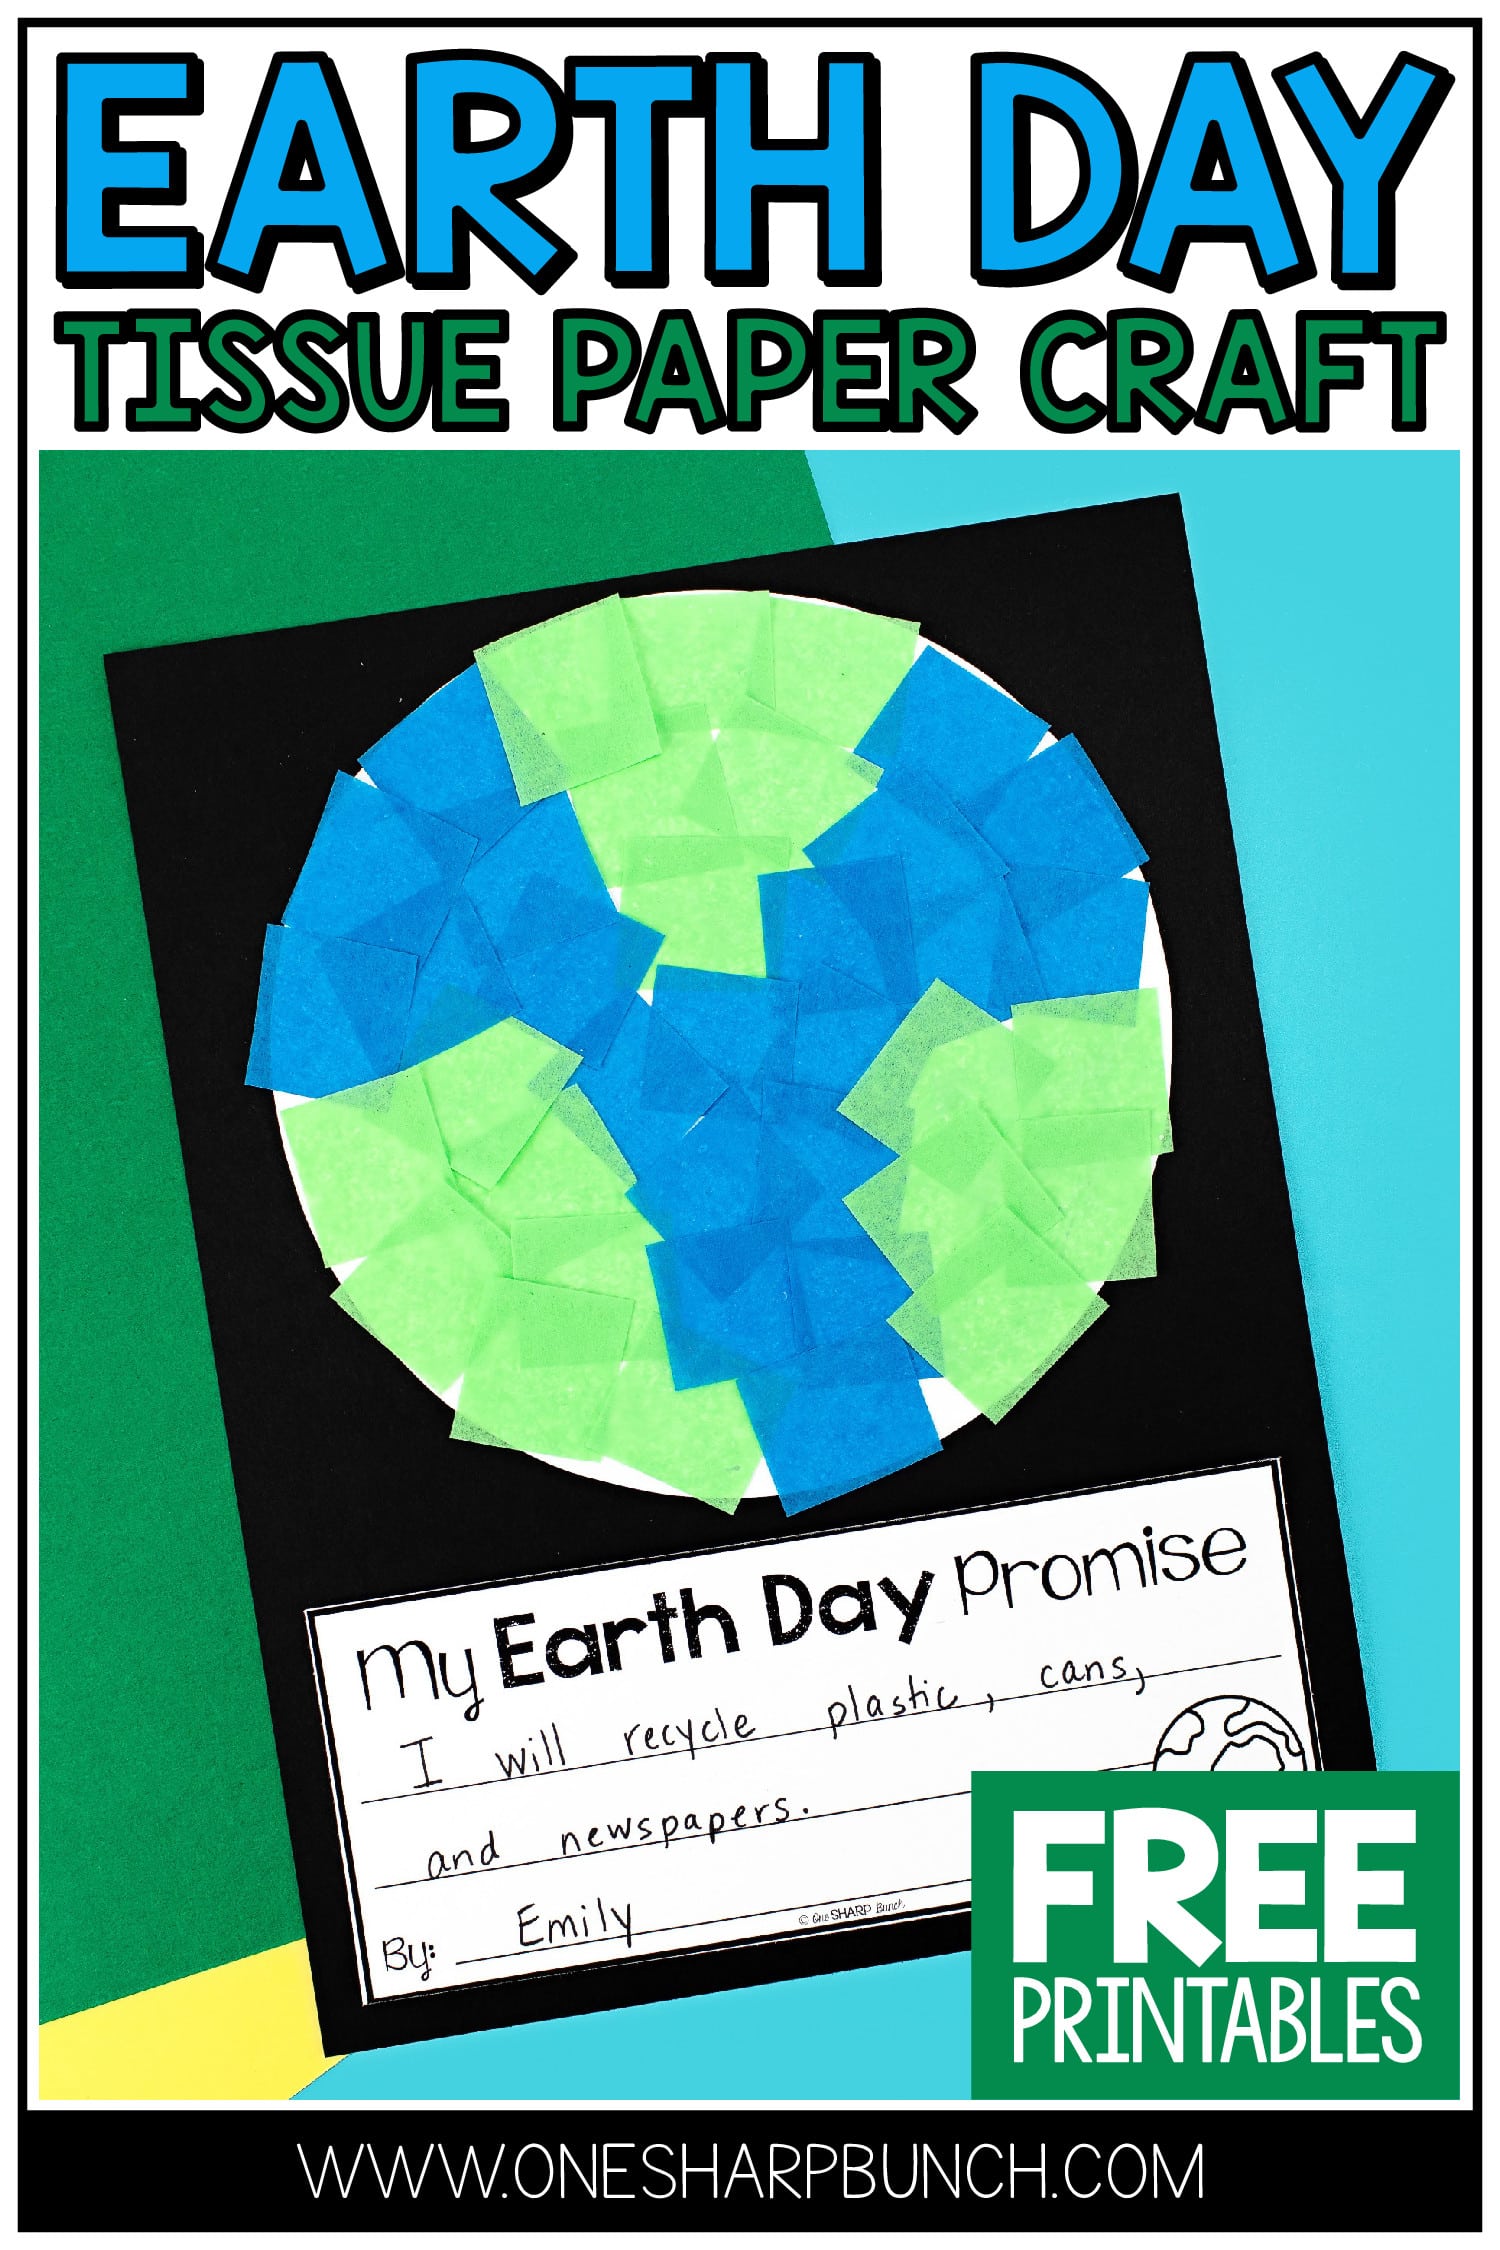 Pair this tissue paper Earth Day craft mosaic for kids with your favorite Earth Day books and Earth Day activities! This Earth craft is simple enough for kindergarten, and even, preschool students. Add an "Earth Day Promise" to the craft with the FREE writing prompt! #preschool #kindergarten #firstgrade #earthday #craftsforkids #kidscrafts #teachers #springactivities #teacher